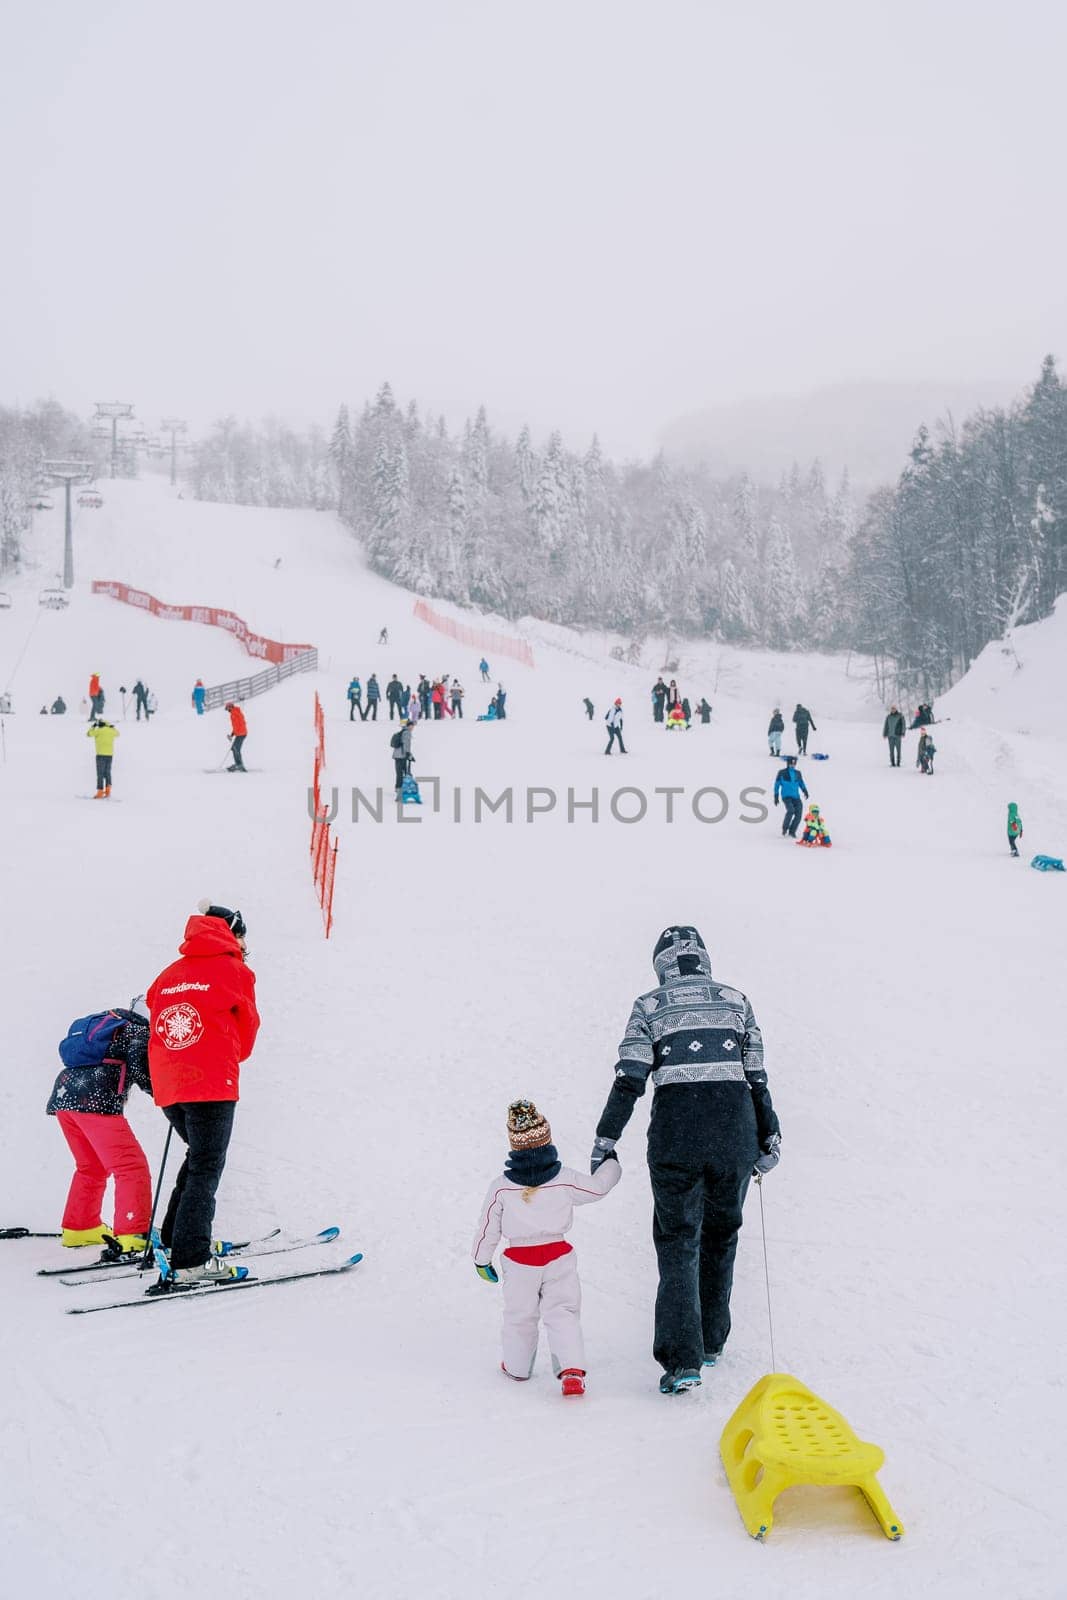 Mothers with children on skis and sleds climb a snow-covered ski slope along the red fence. Back view. High quality photo